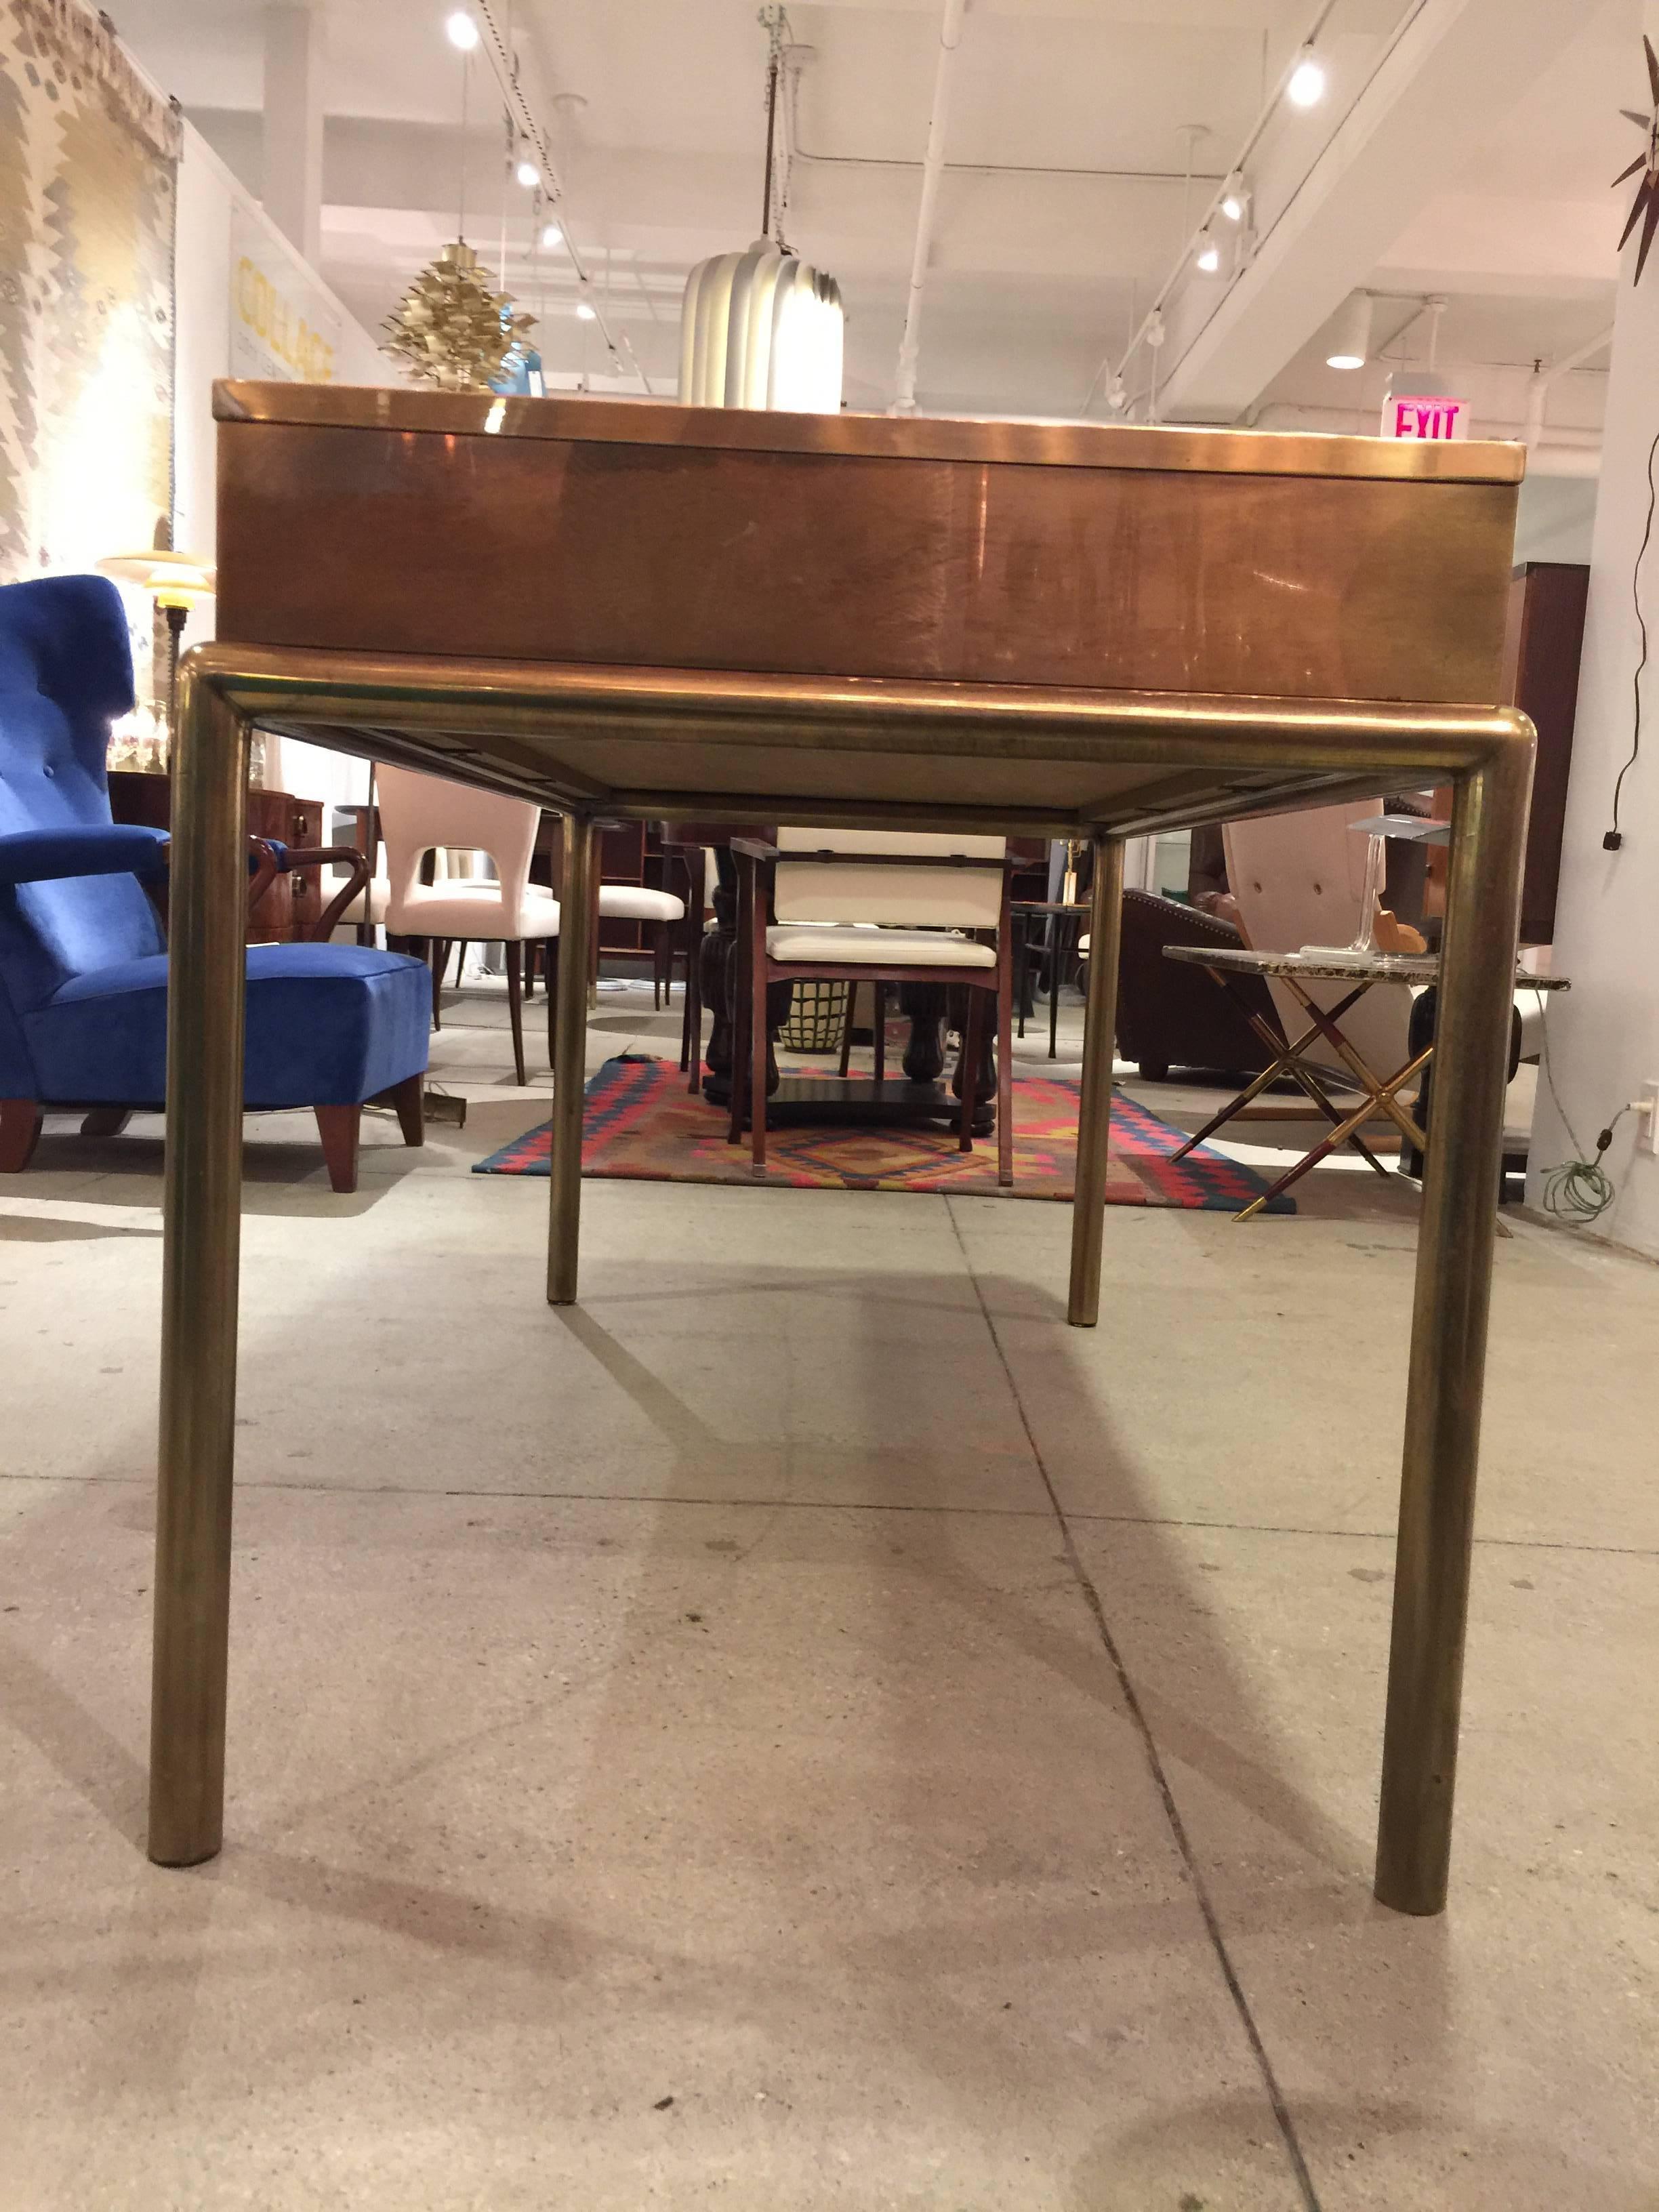 A beautiful brass and leather desk by Bernhard Rohne for Mastercraft.
Beautiful simple design exuding elegance with the rich use of materials and combination of them.
The hand stained leather compliments the brass finish.
Incredible hardware adds